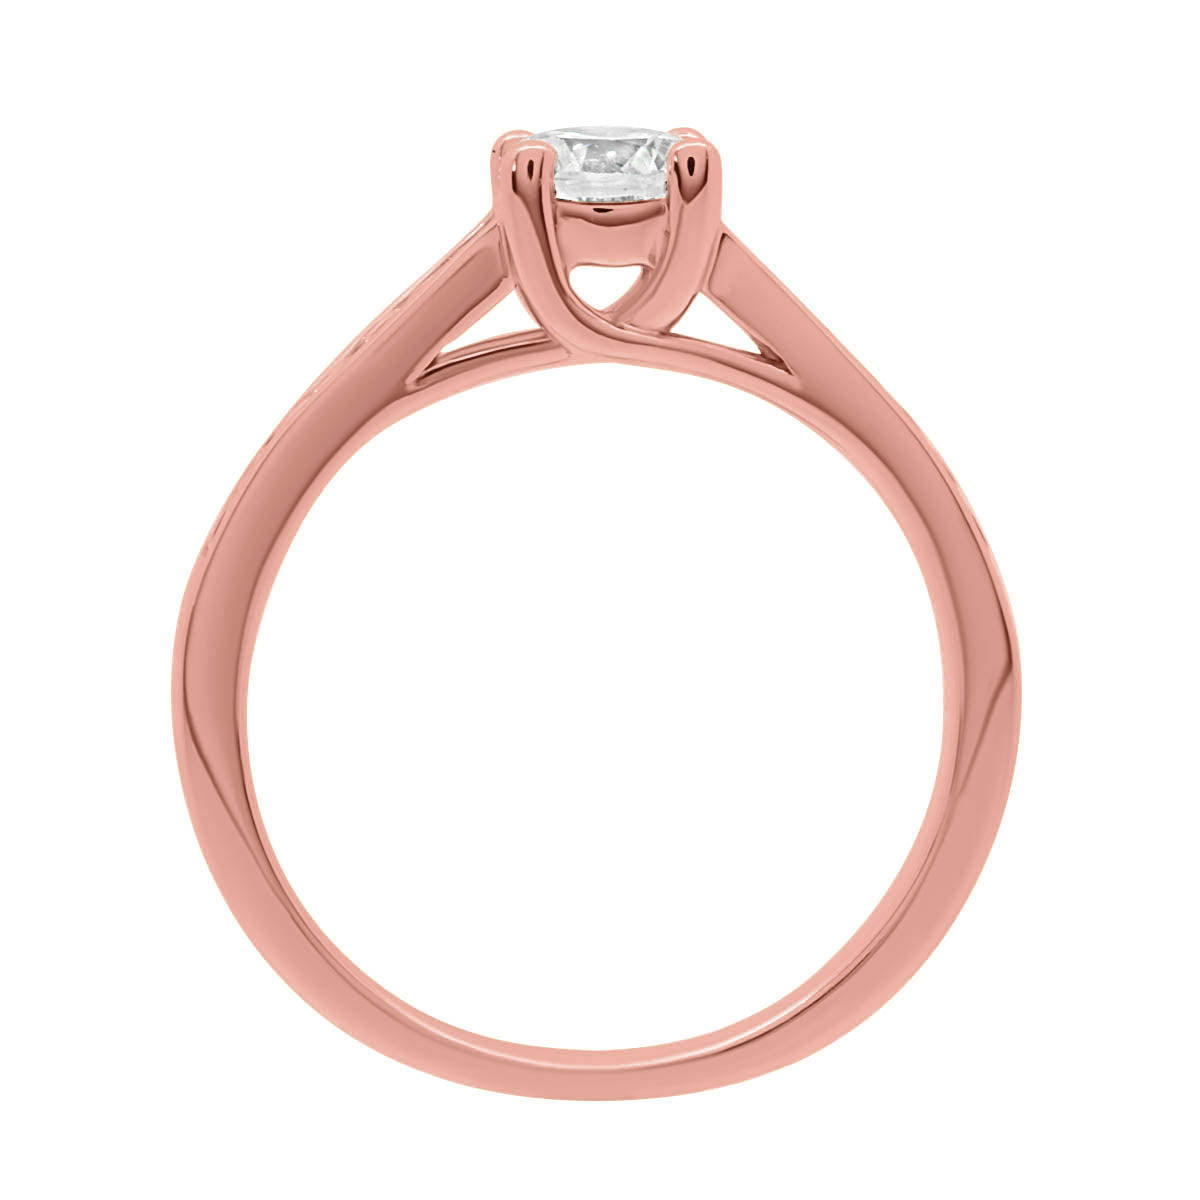 Round Diamond with Channel Set Princess Cut Diamonds in rose gold standing upright